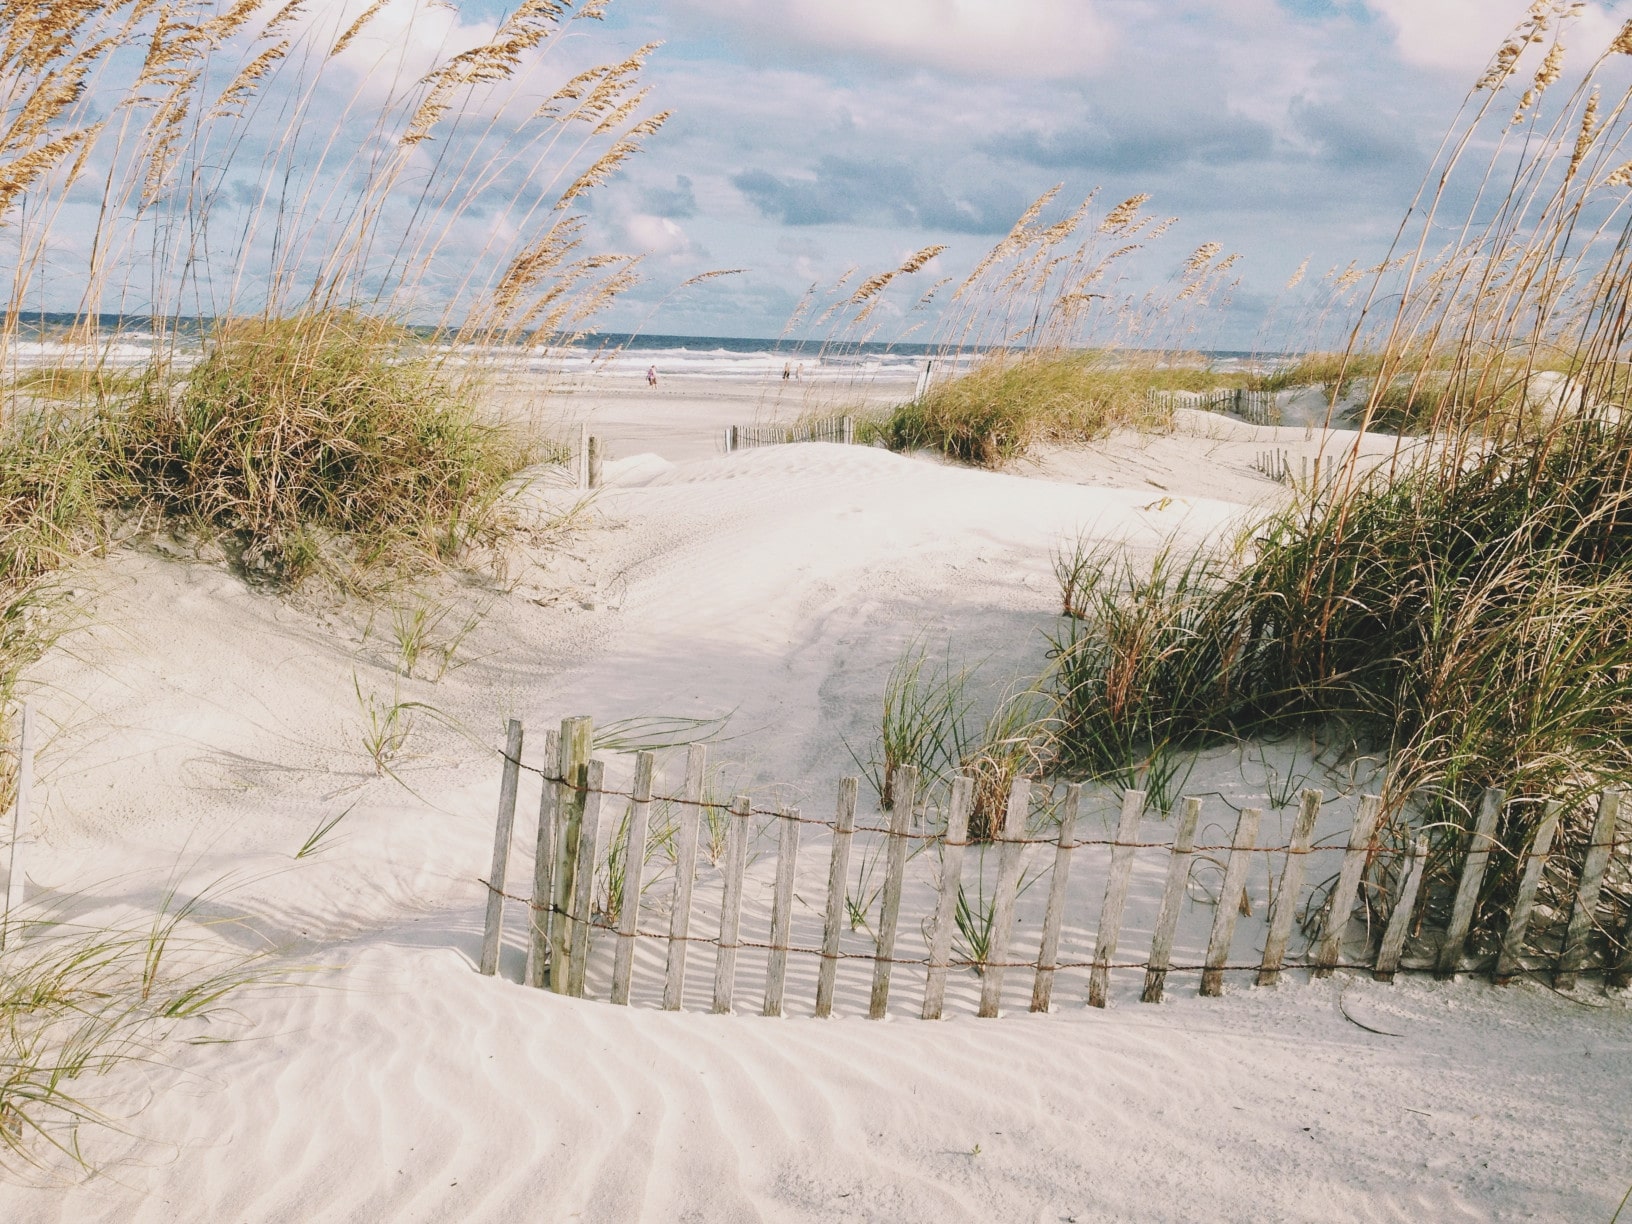 Enjoy a Day at the St. Augustine Beach